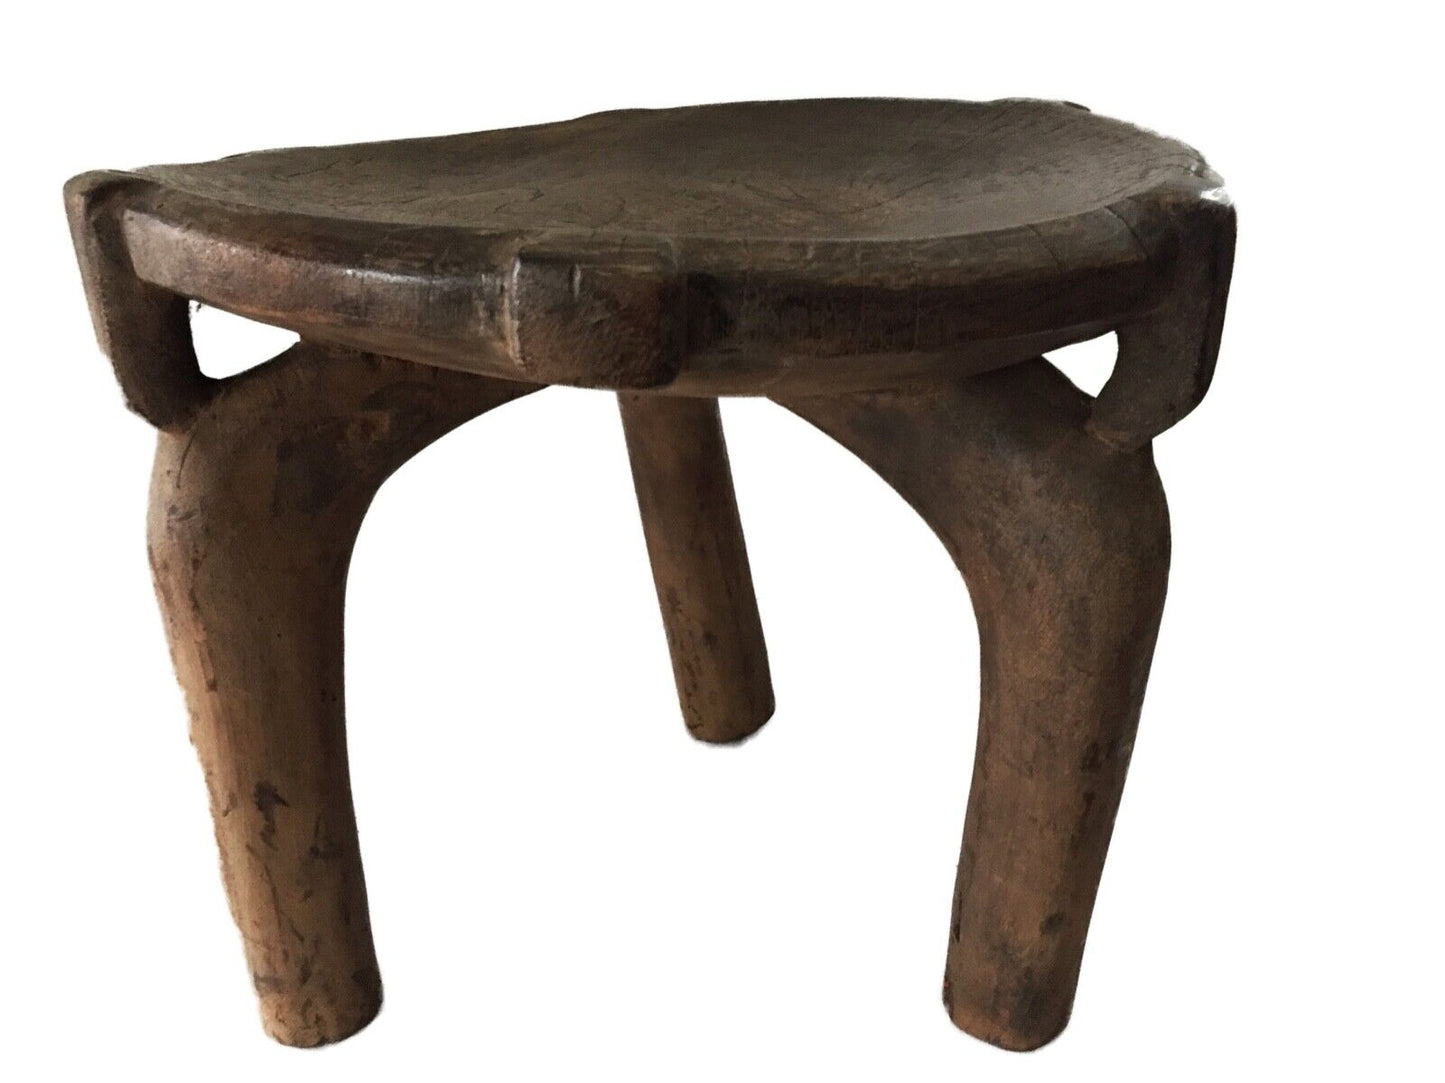 # 2012/90 African Old  Wood Milk Stool Hehe Gogo People Tanzania 14" H by 18" D